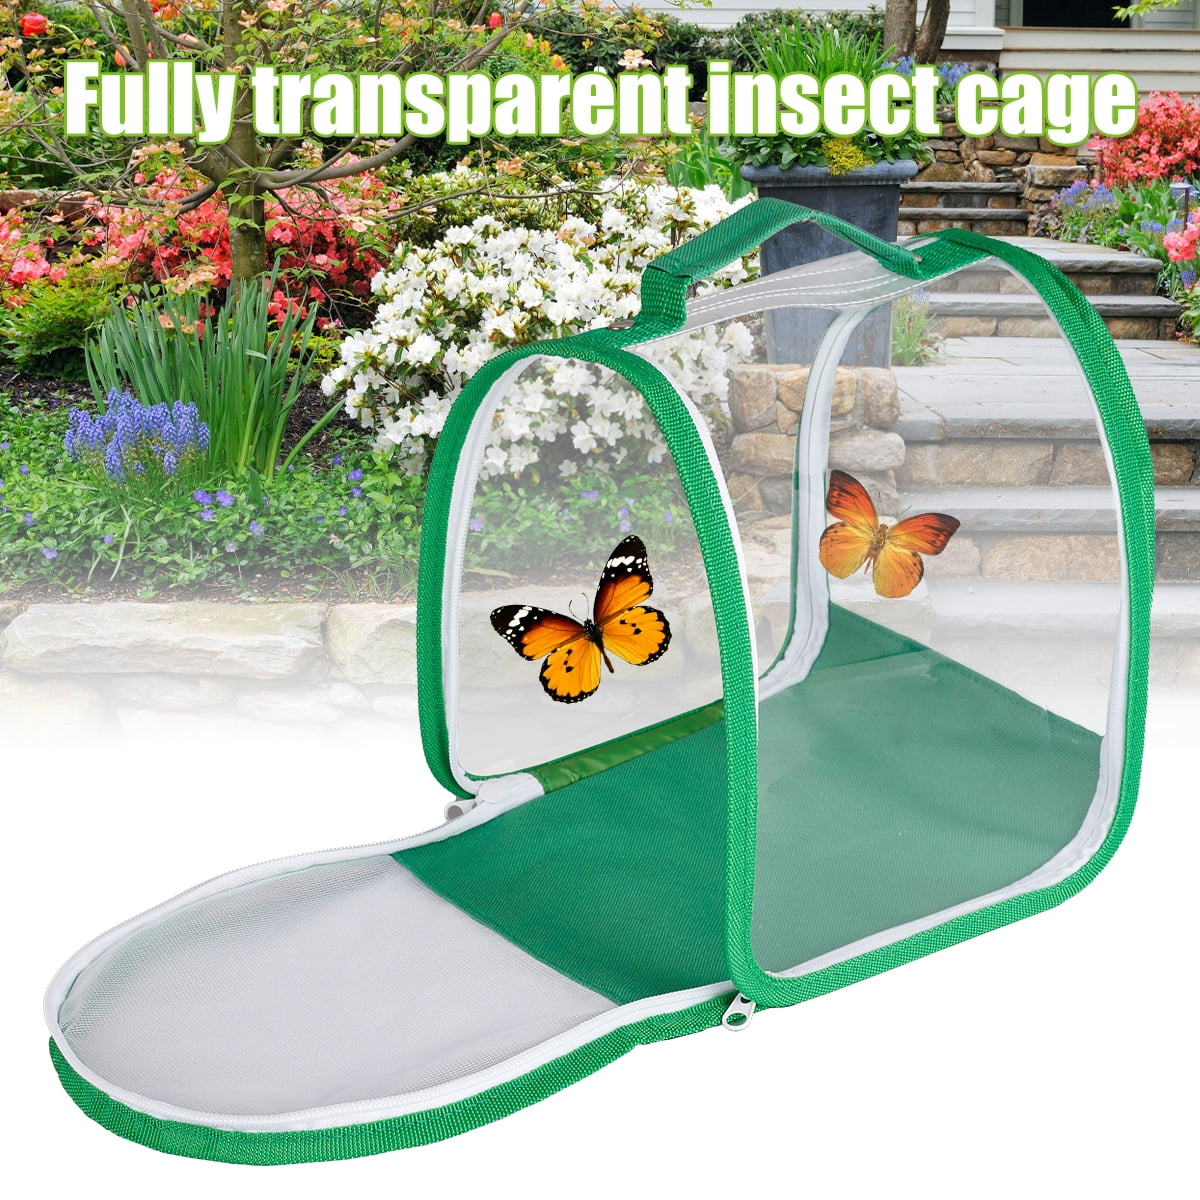 RESTCLOUD Insect and Butterfly Habitat Cage Terrarium Pop-Up 12 x 12 x 12 Inches with Zipper Protection